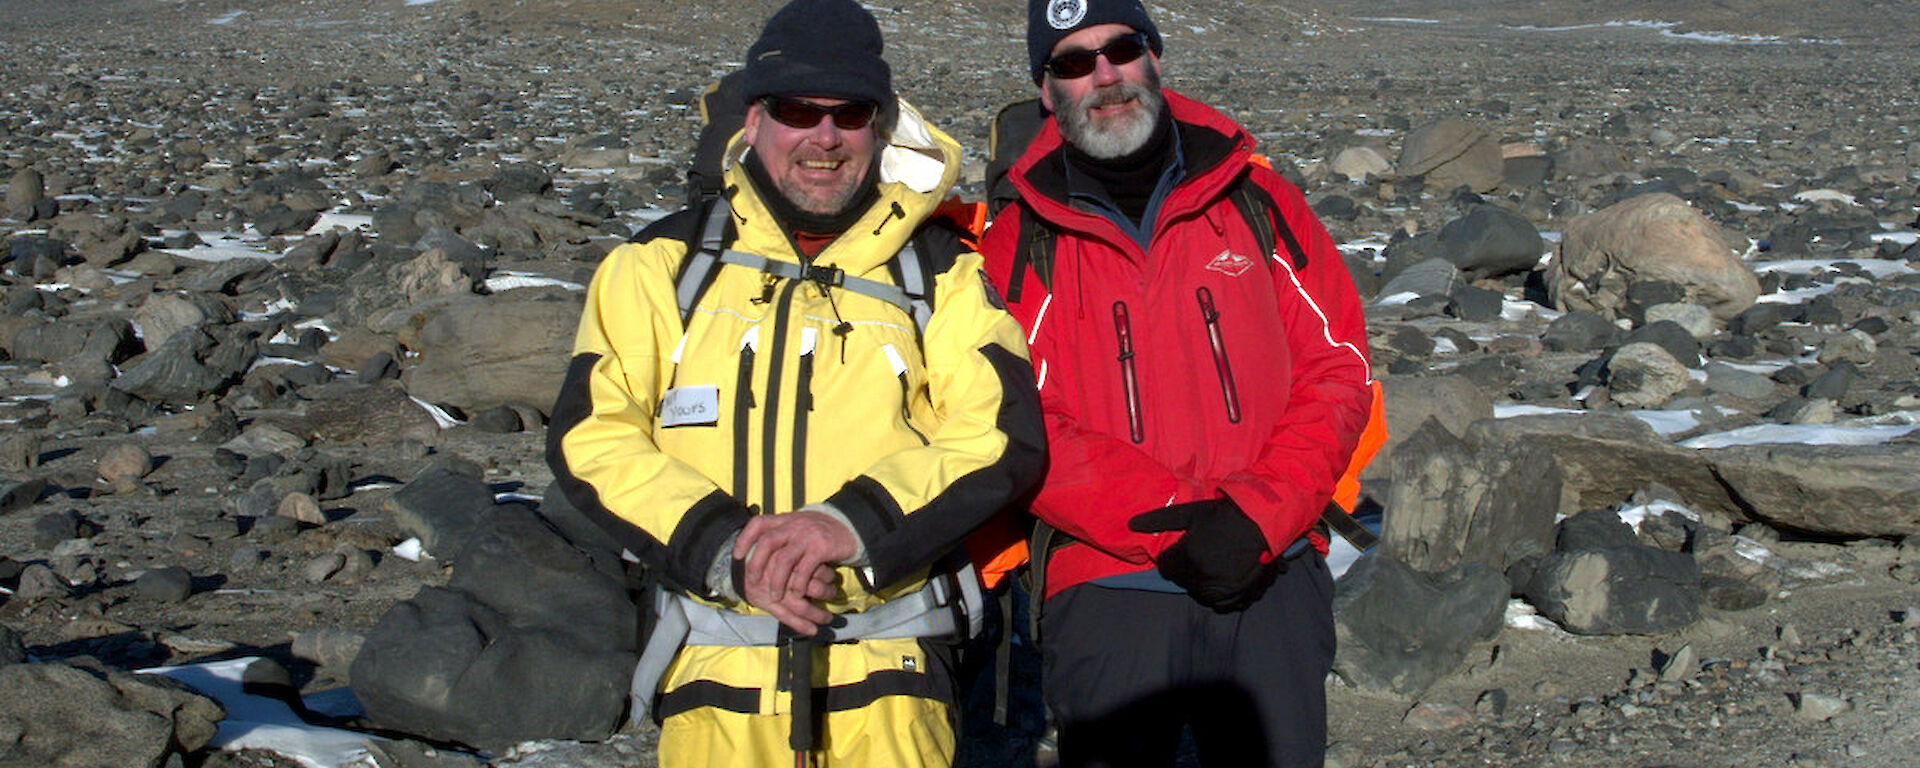 Two expeditioners, rocky terrain in background pose for photograph